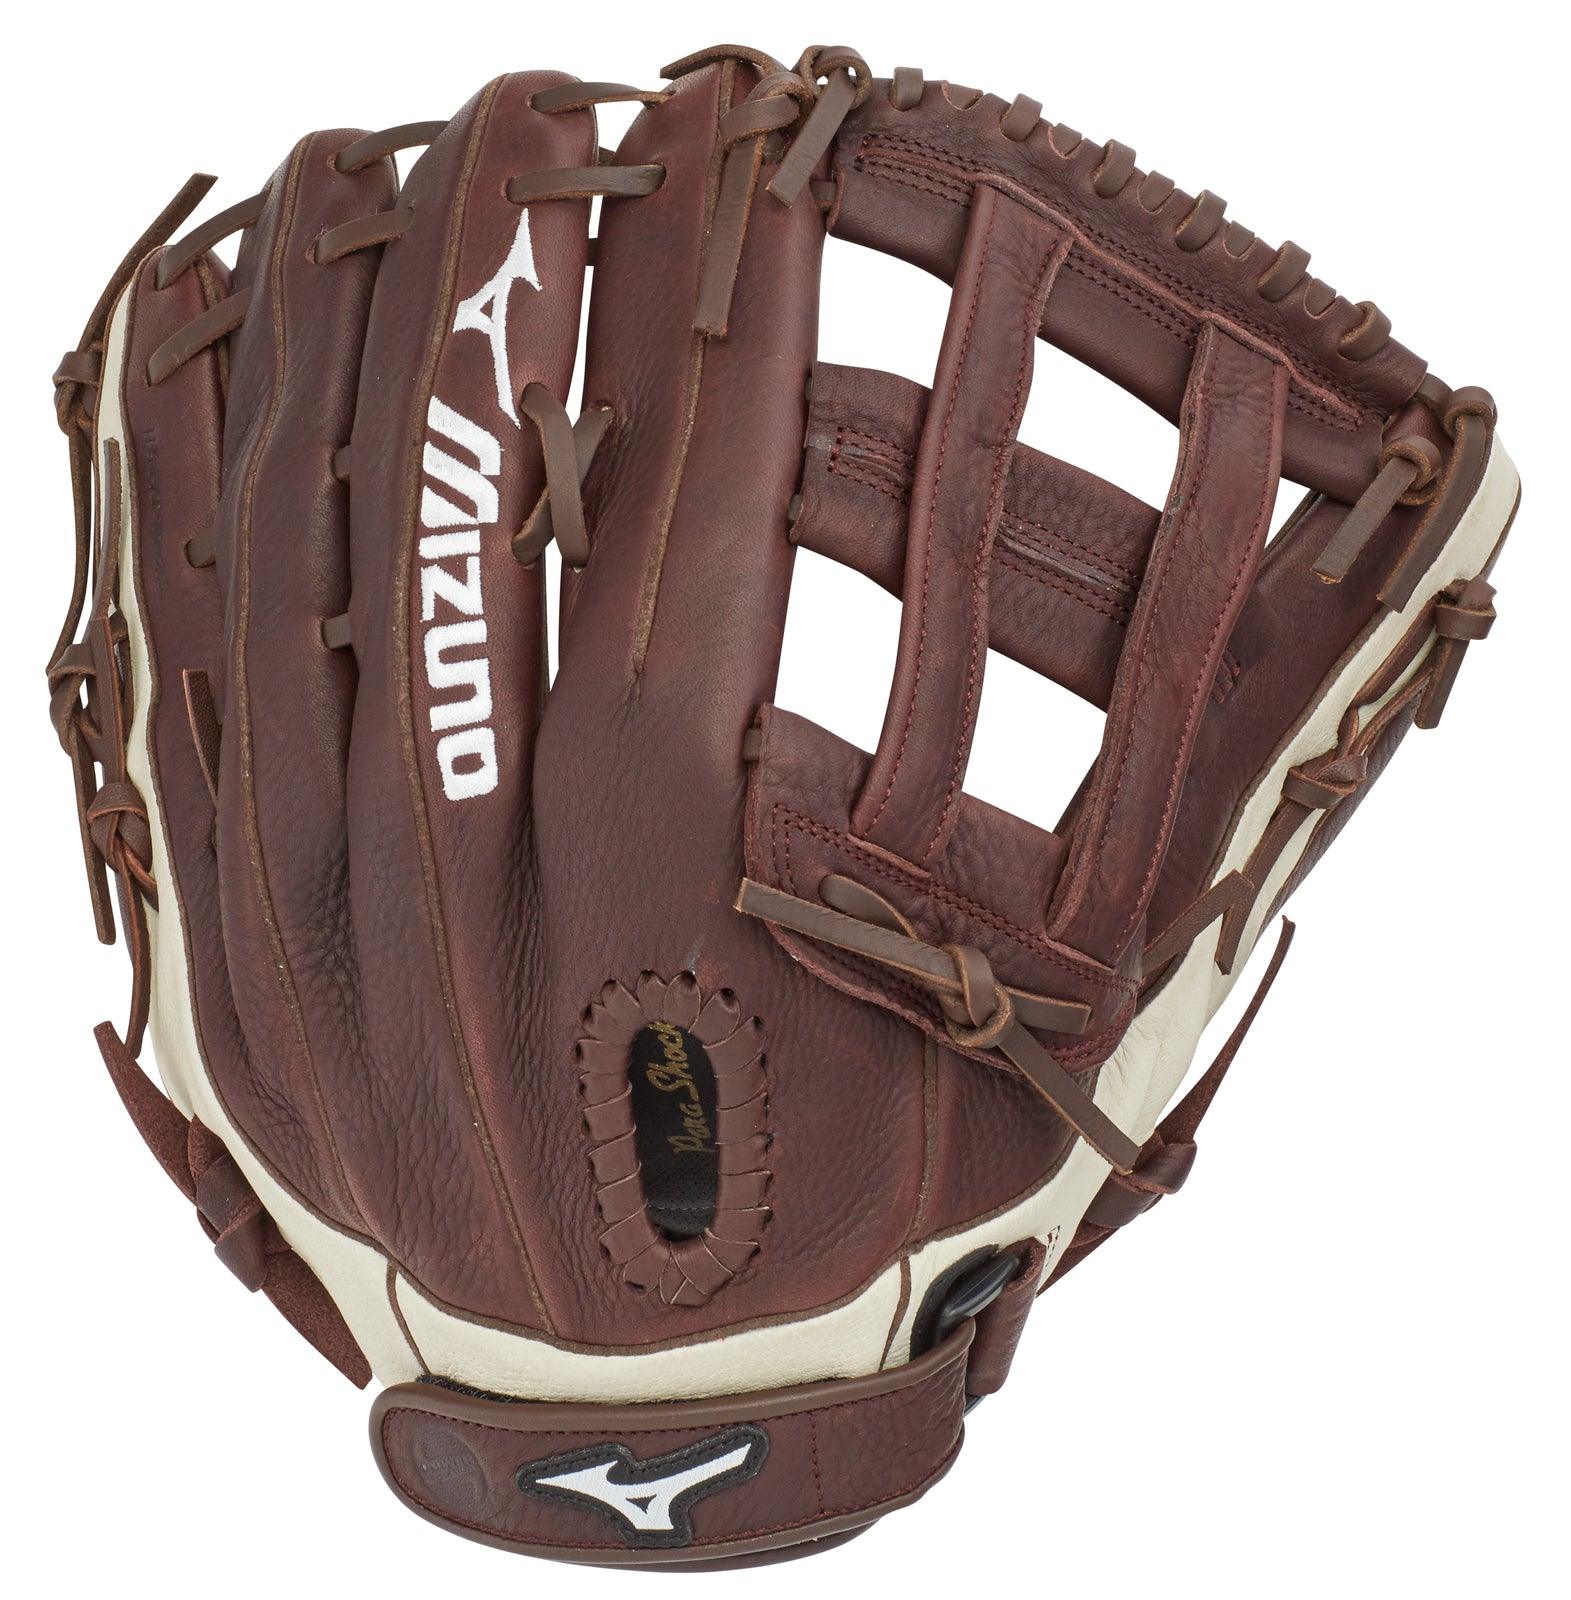 Franchise Series Slowpitch Softball Glove 13" - Sports Excellence